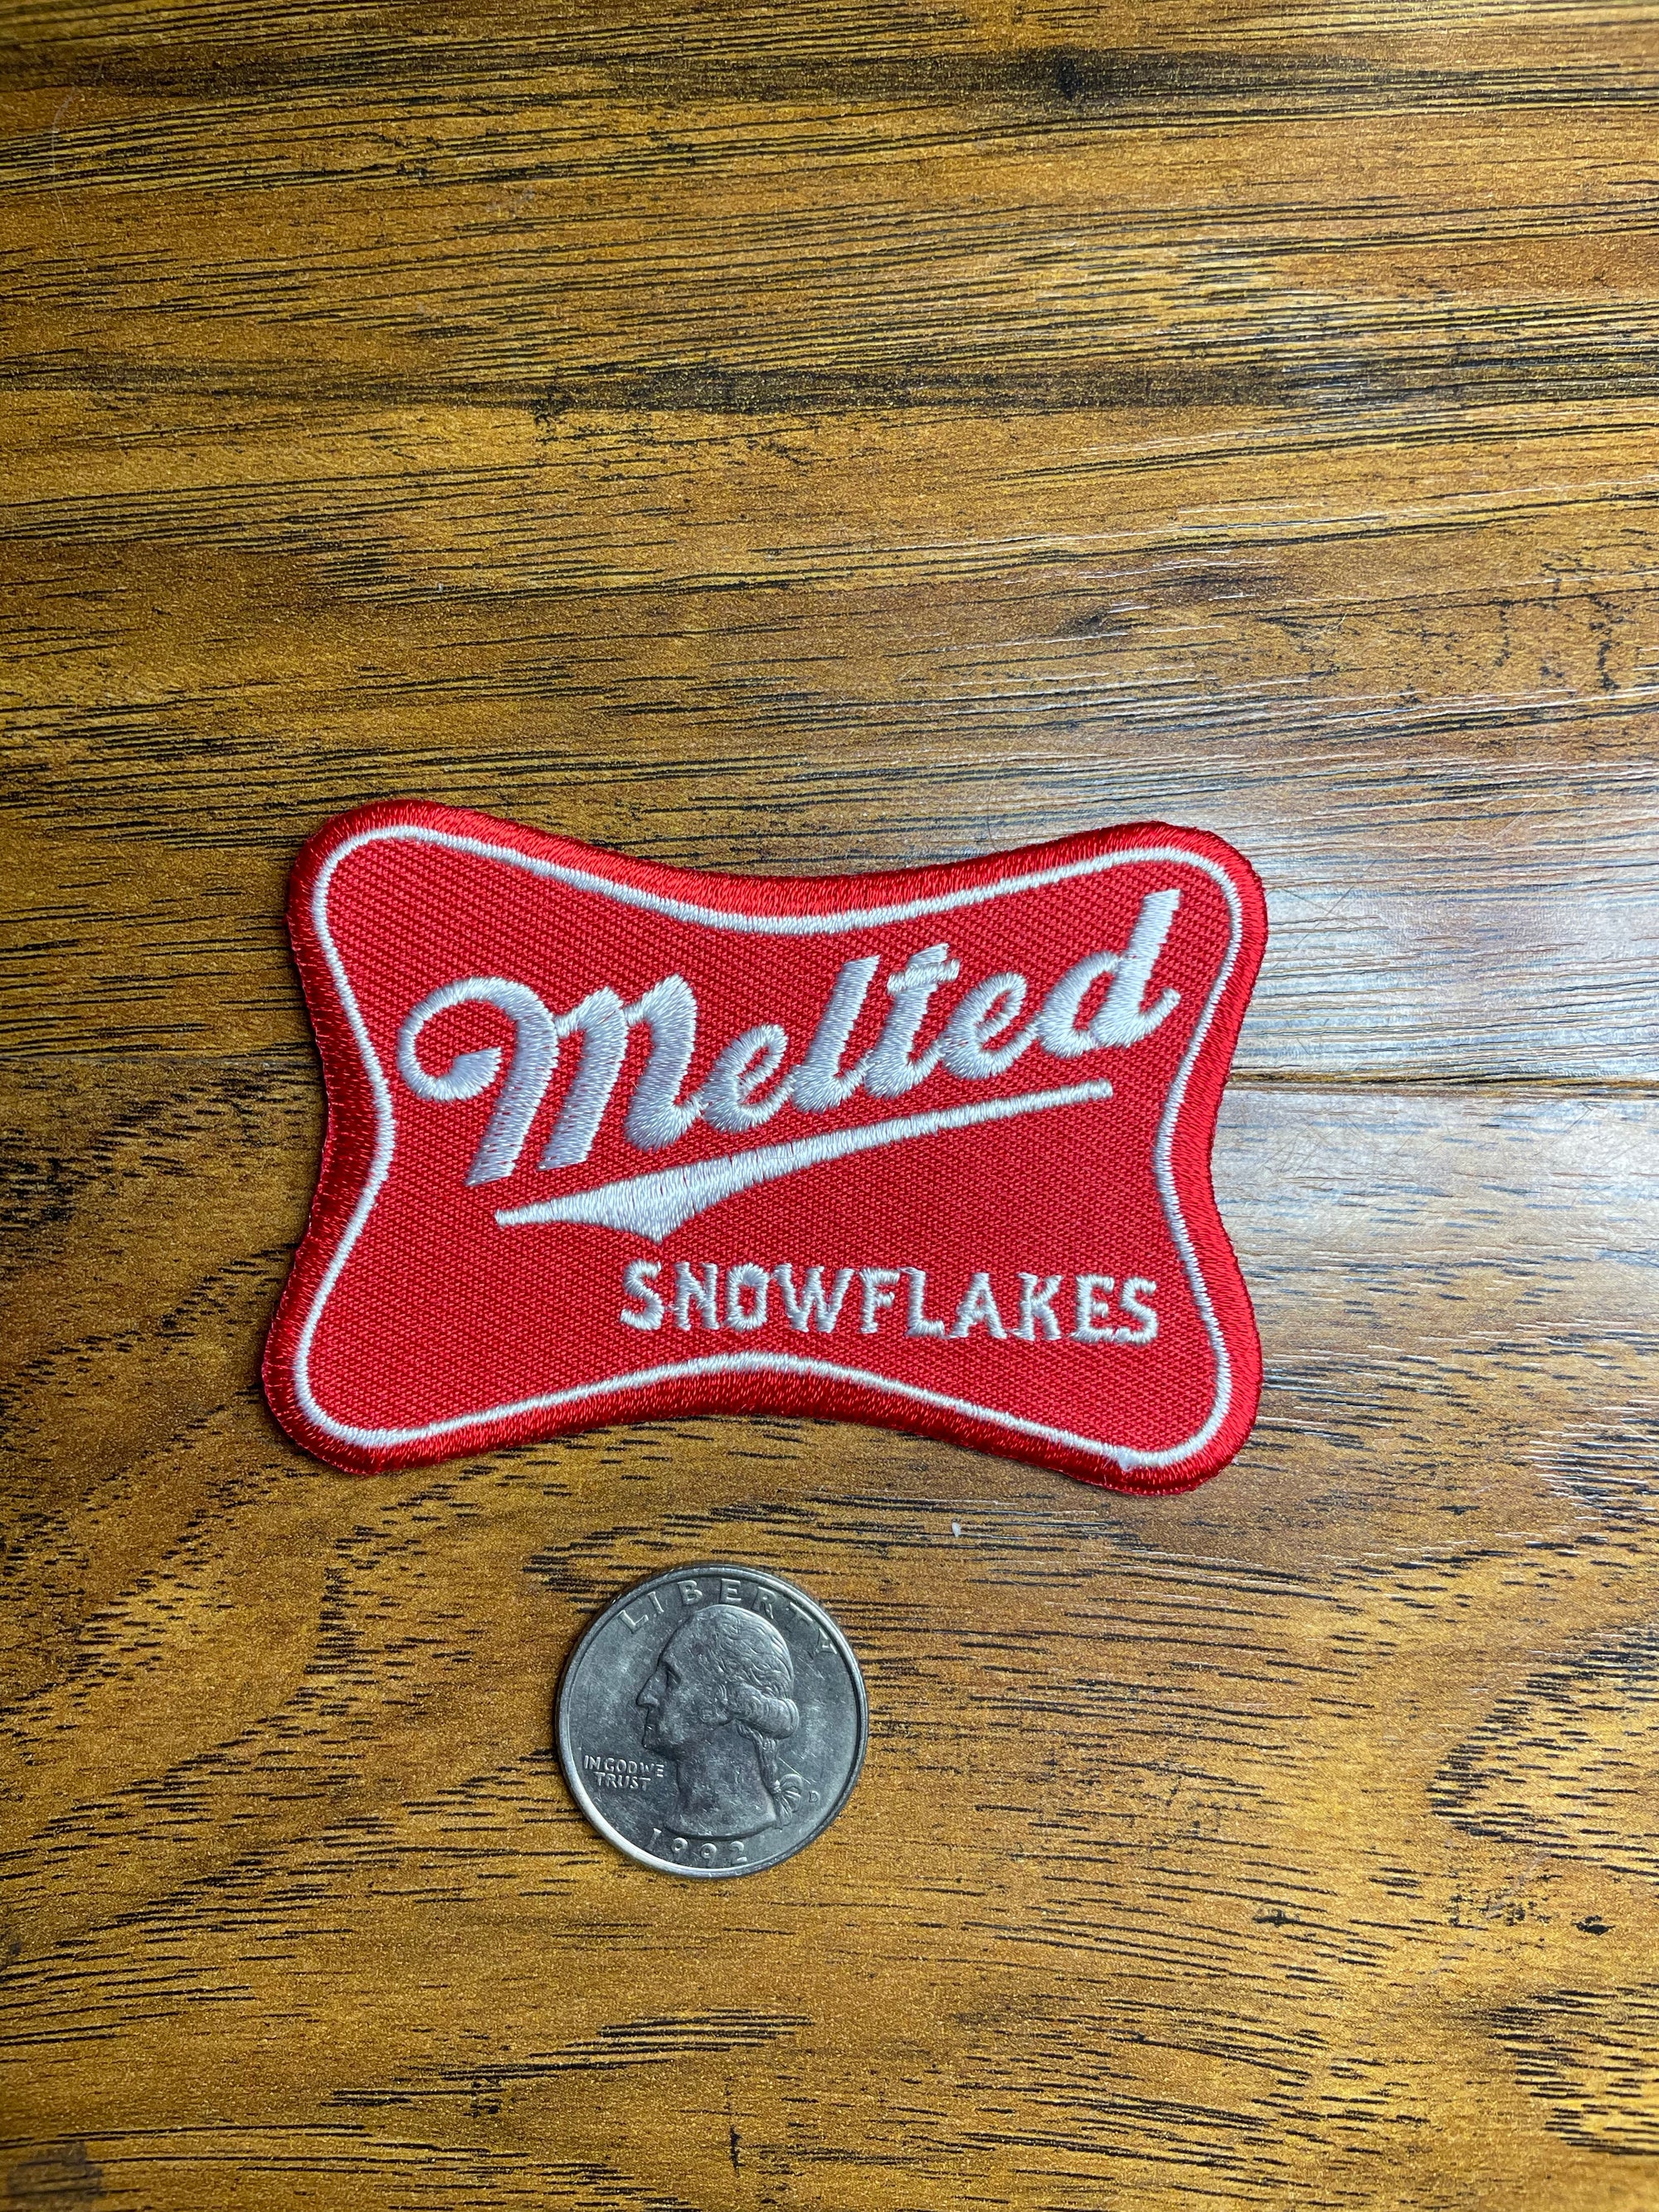 Melted Snowflakes